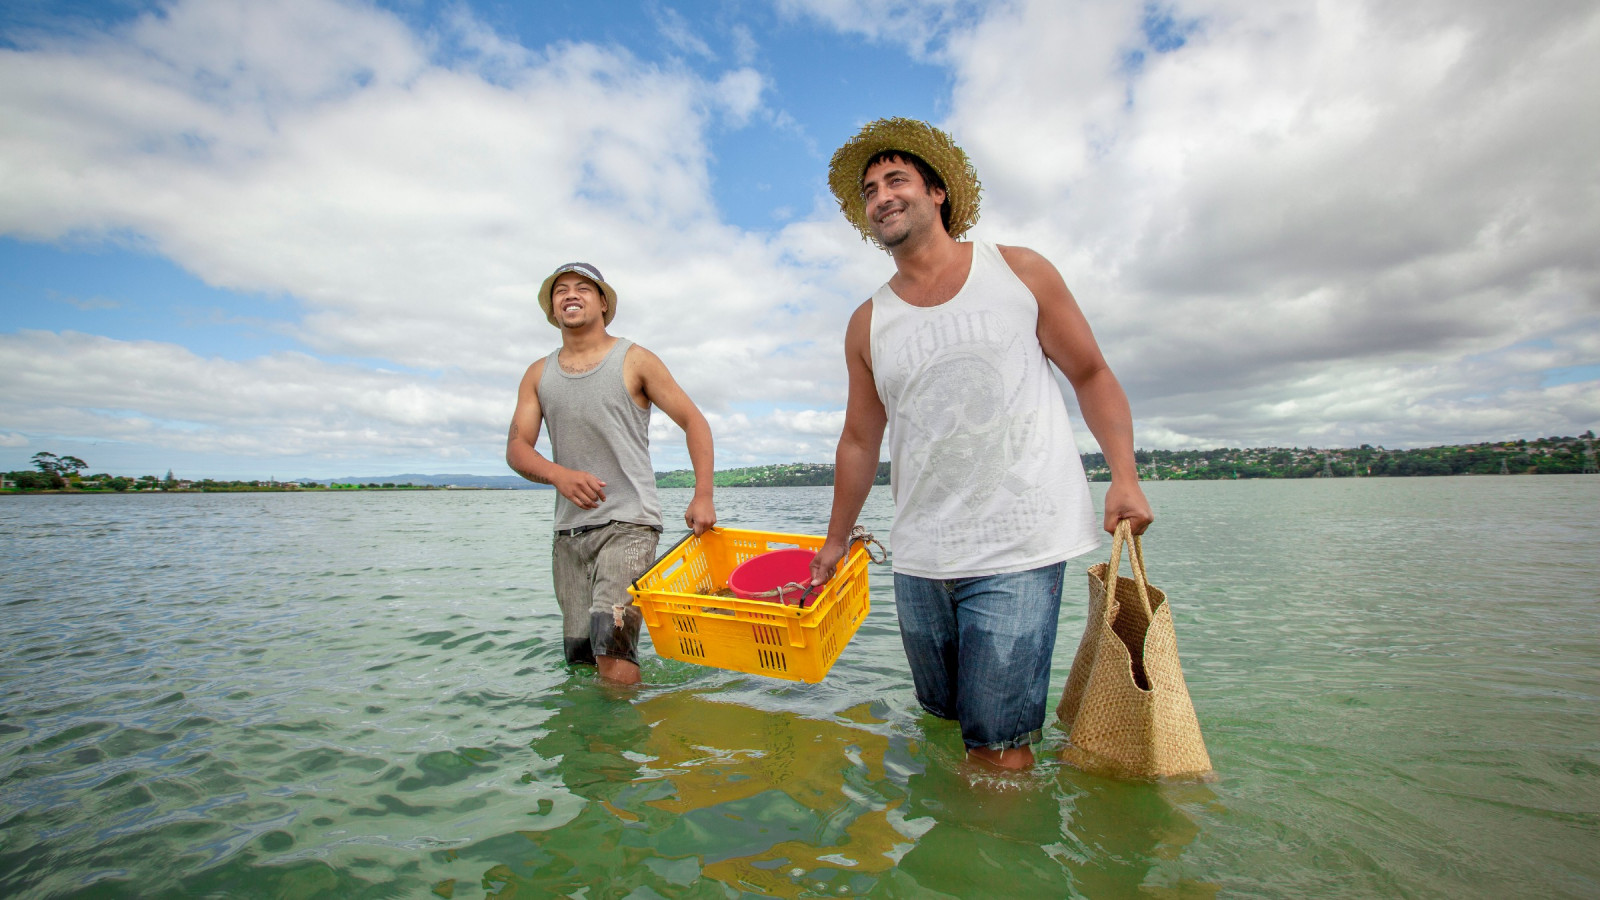 Two men smiling, one carrying a woven bag and both carrying a basket together as they wade through a body of water.